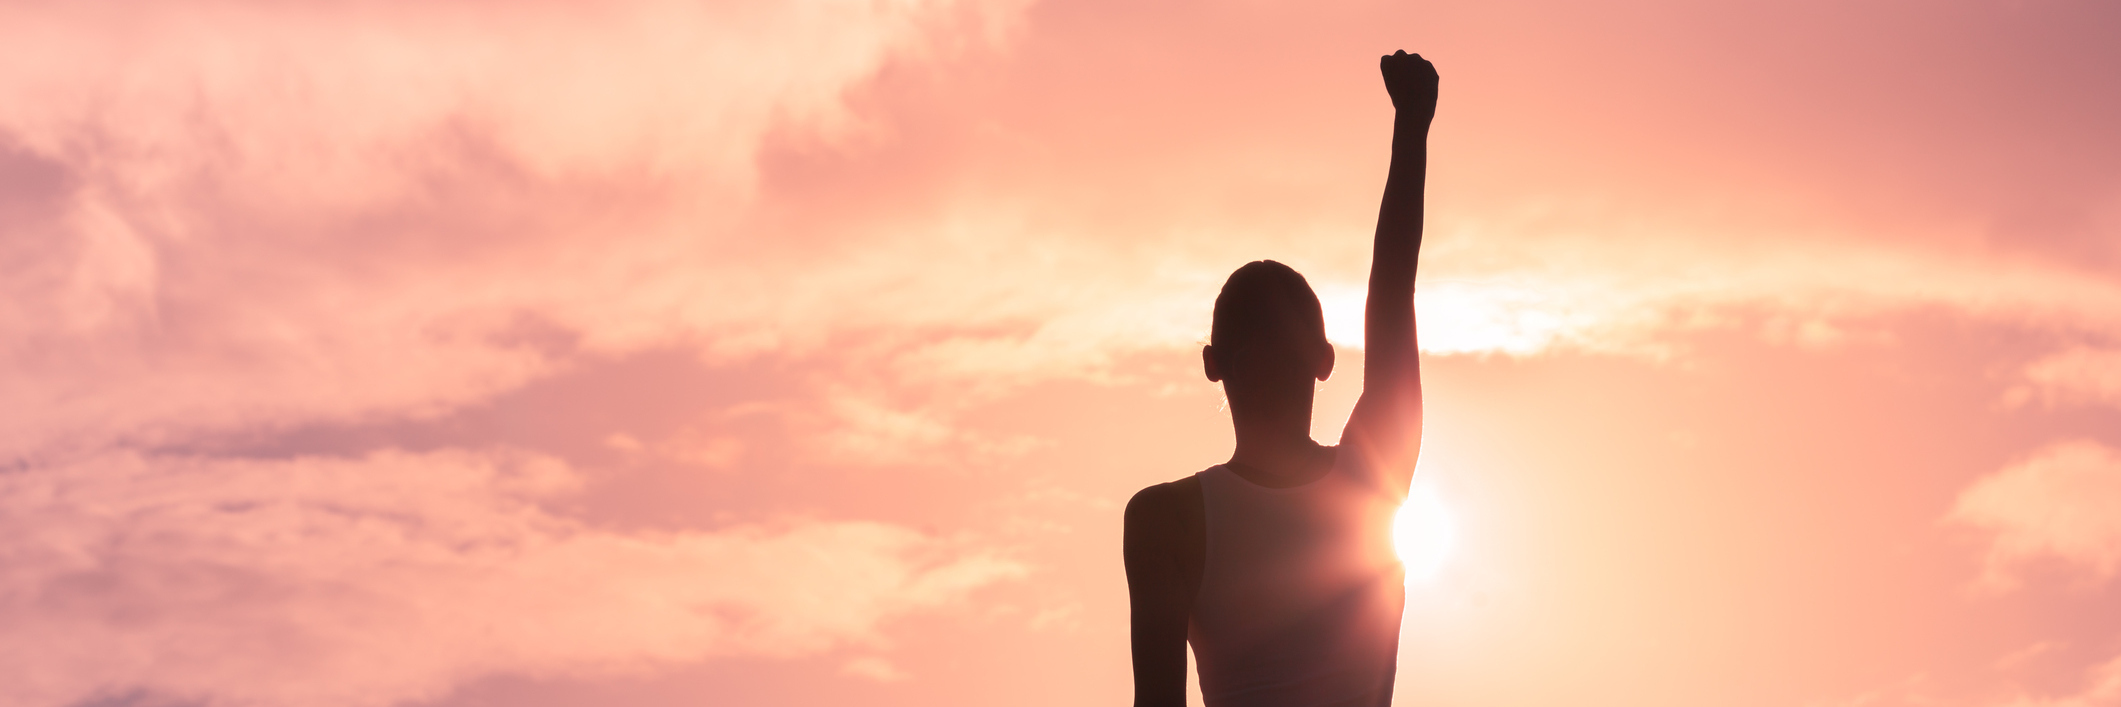 woman raising her arm in victory at sunset